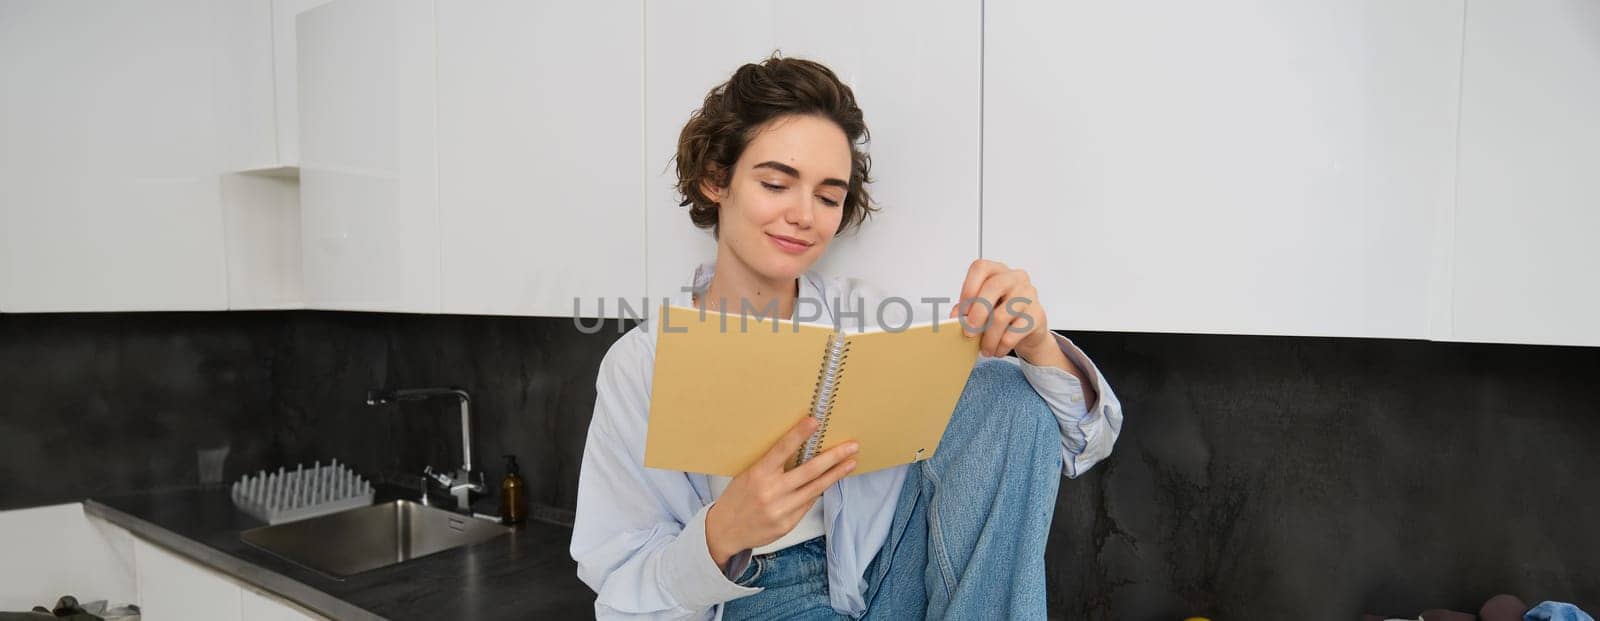 Portrait of young modern woman sitting in kitchen, flipping pages, reading journal book, smiling happily. People and lifestyle concept